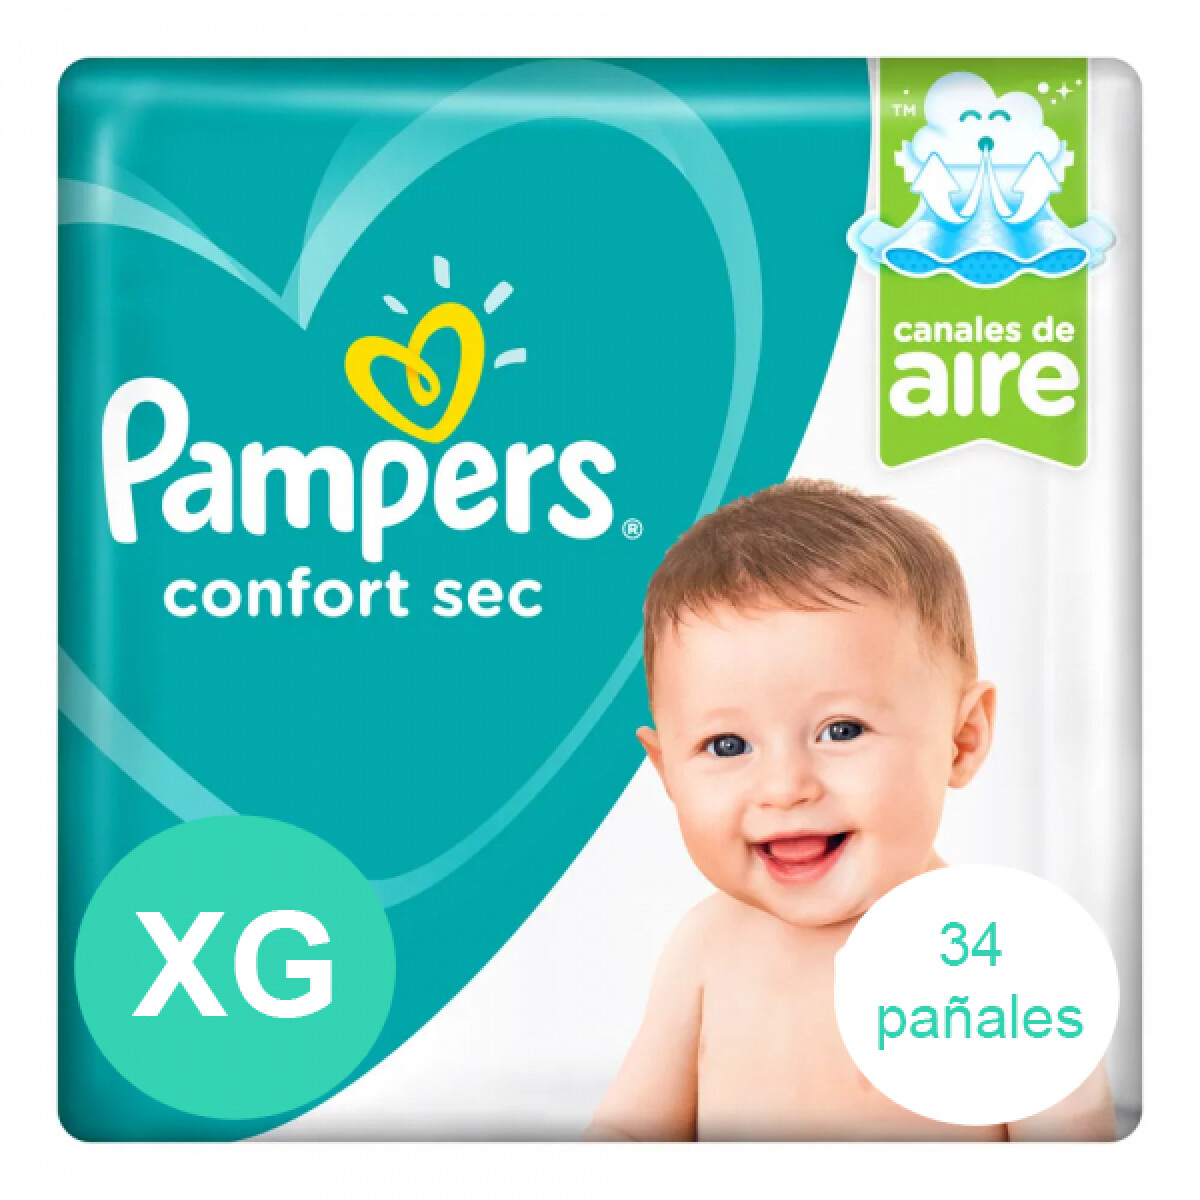 Pampers Confort Sec talle XG 